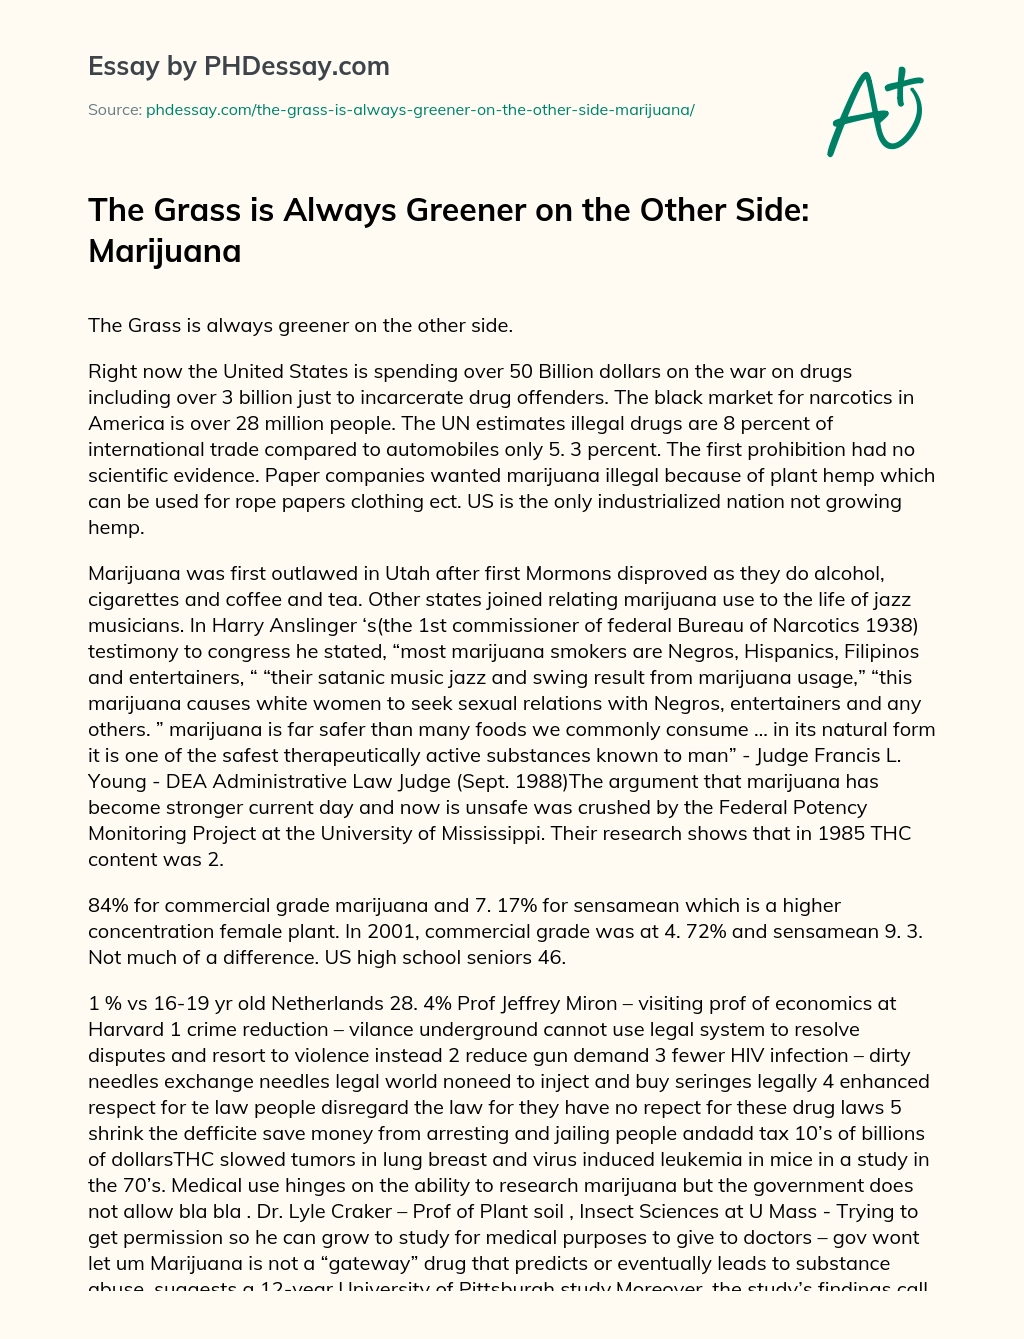 The Grass is Always Greener on the Other Side: Marijuana essay